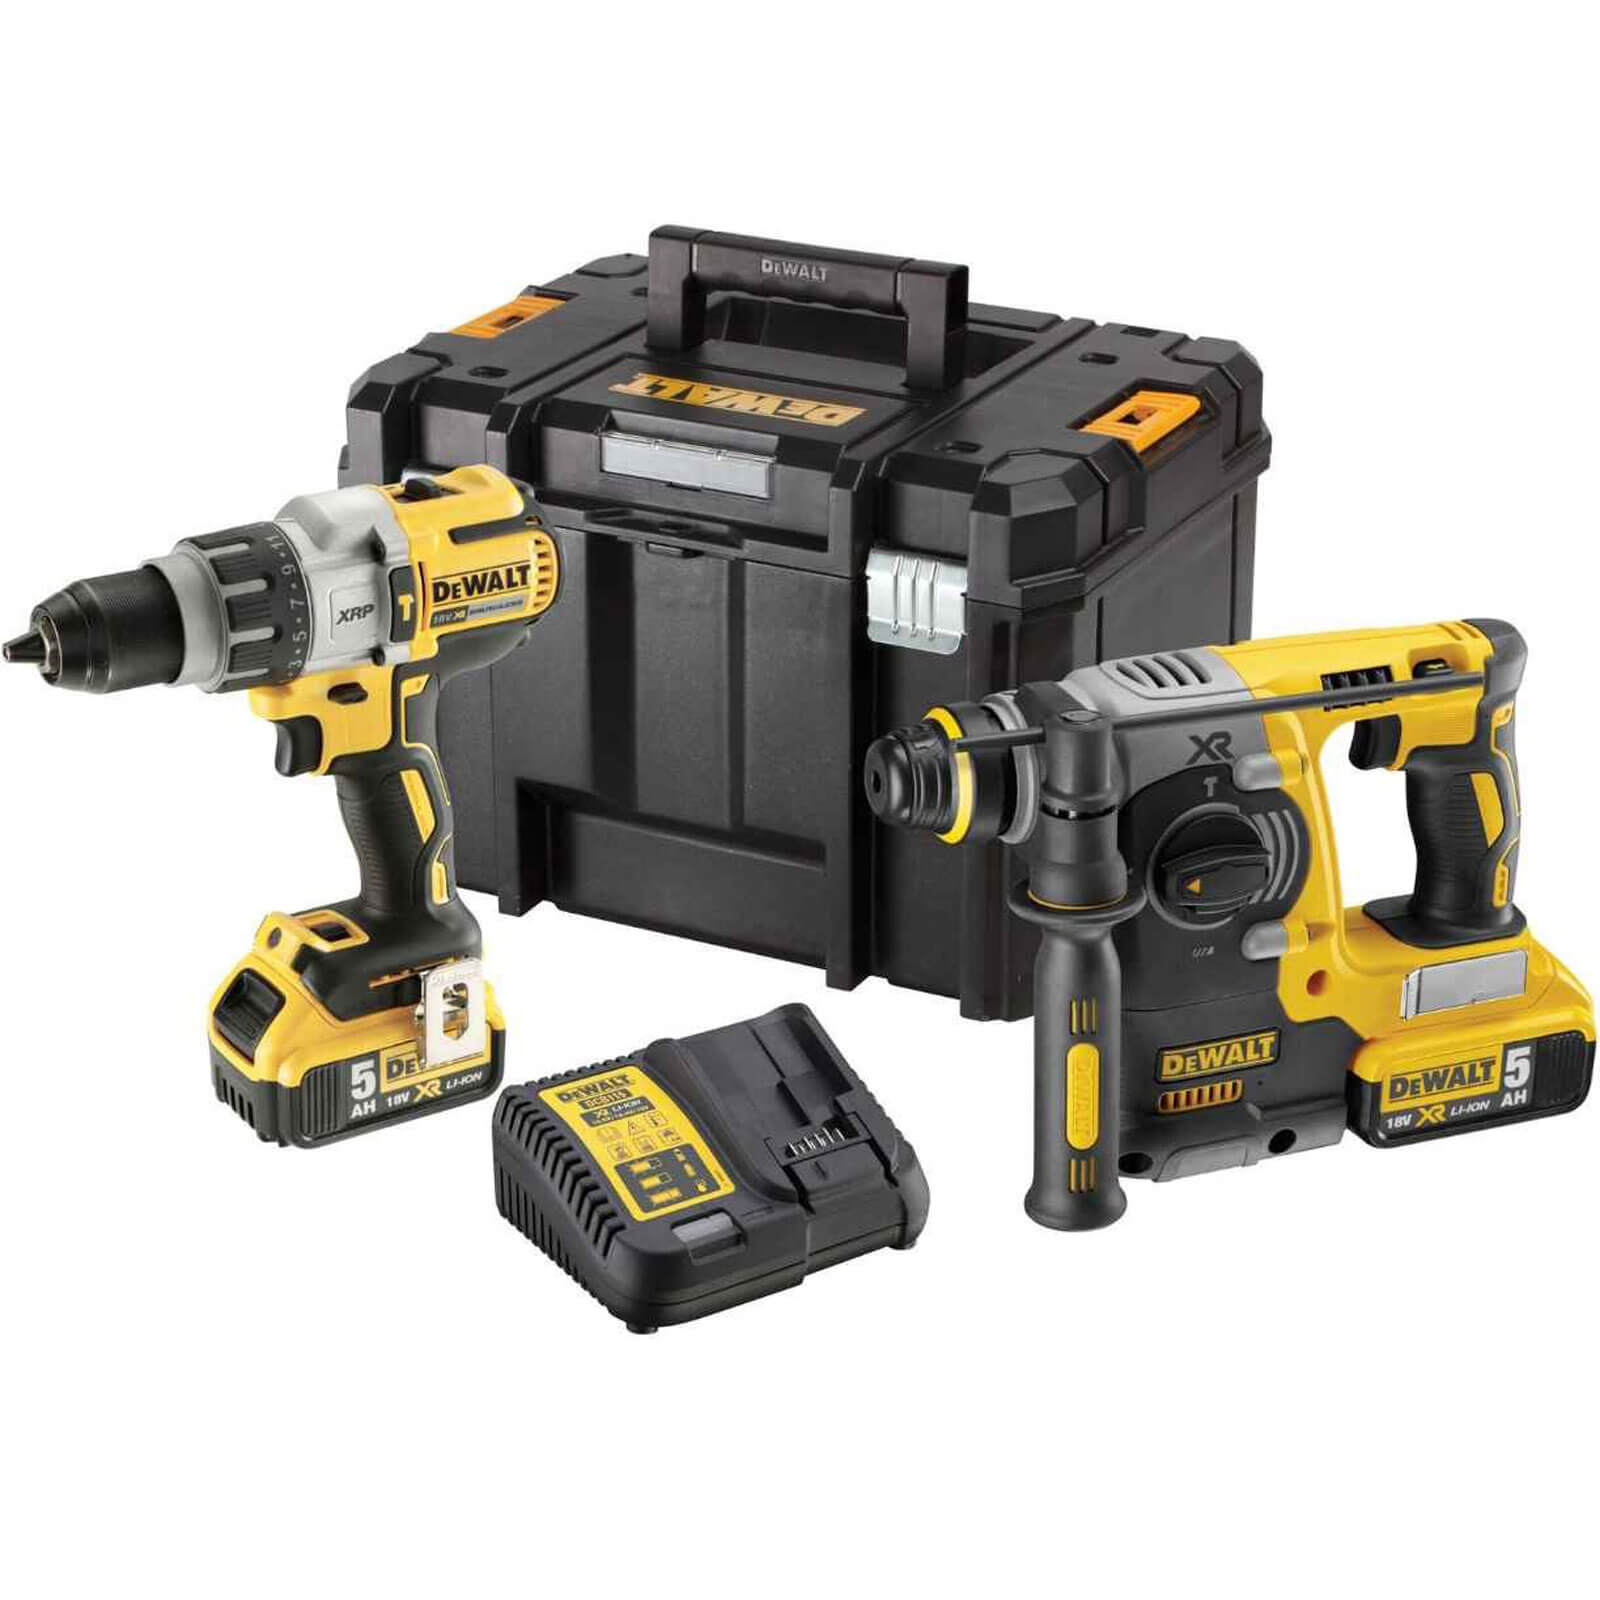 Image of DeWalt DCK229P2T 18v XR Cordless Brushless Combi Drill and SDS Drill Kit 2 x 5ah Li-ion Charger Case